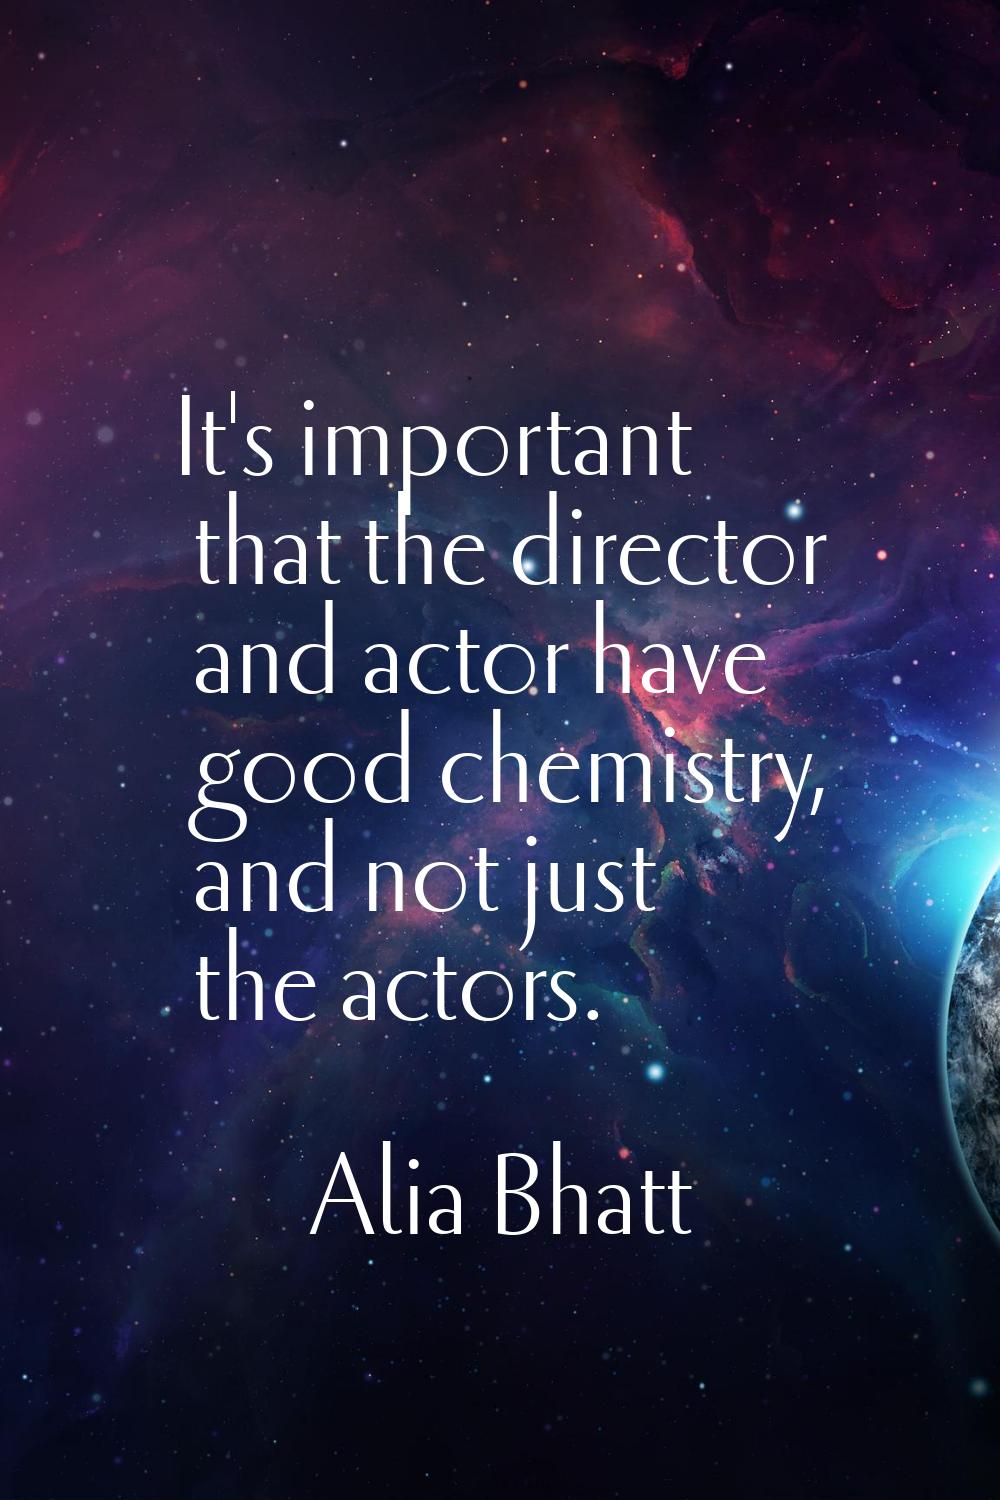 It's important that the director and actor have good chemistry, and not just the actors.